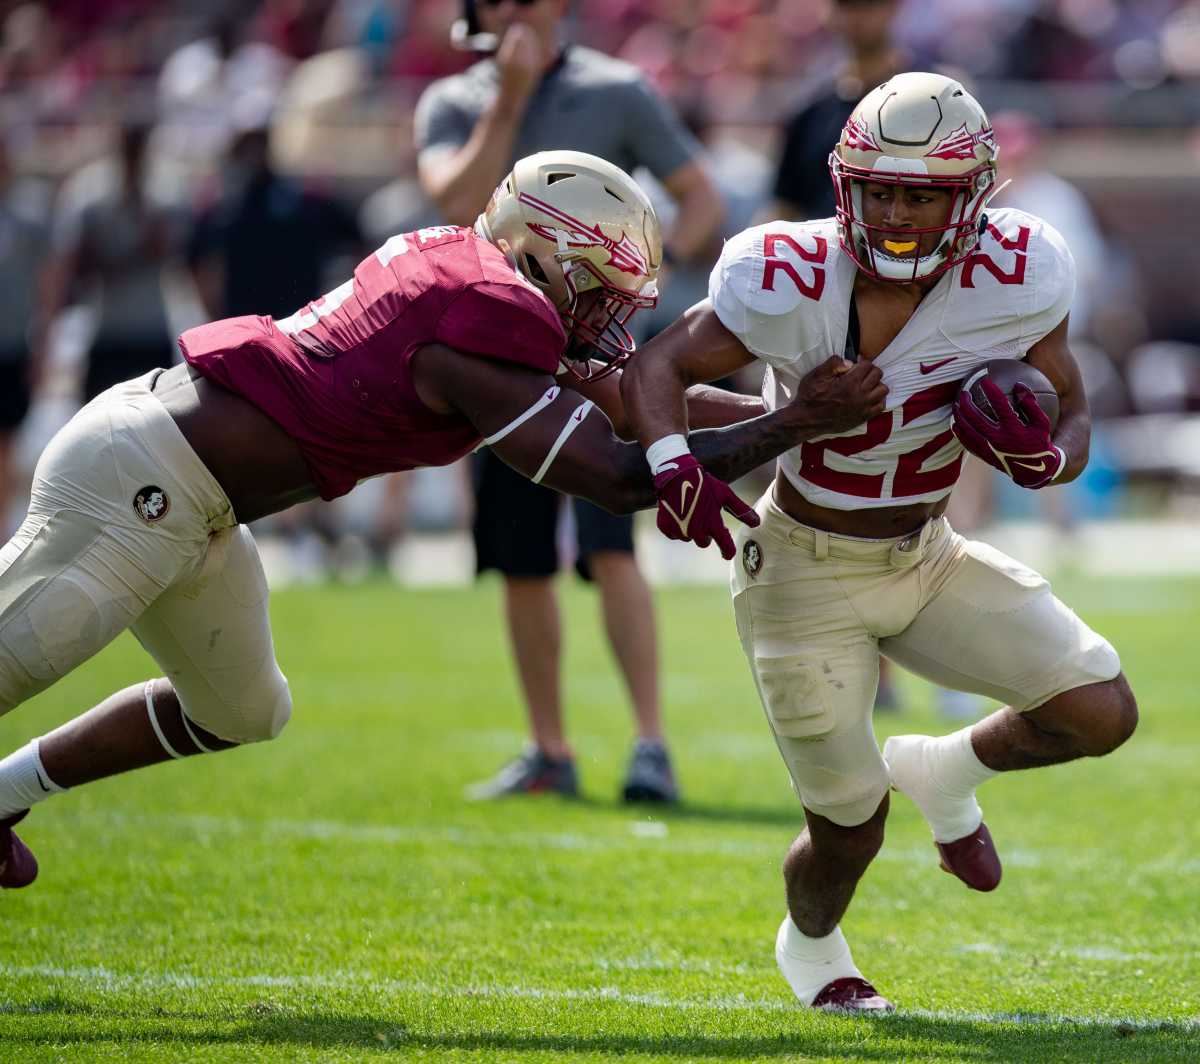 Florida State Seminoles running back CJ Campbell (22) makes his way down the field. Seminole fans watched as the Florida State football team hosted the FSU Garnet and Gold Spring Showcase on Saturday - Alicia Devine USA Today Network